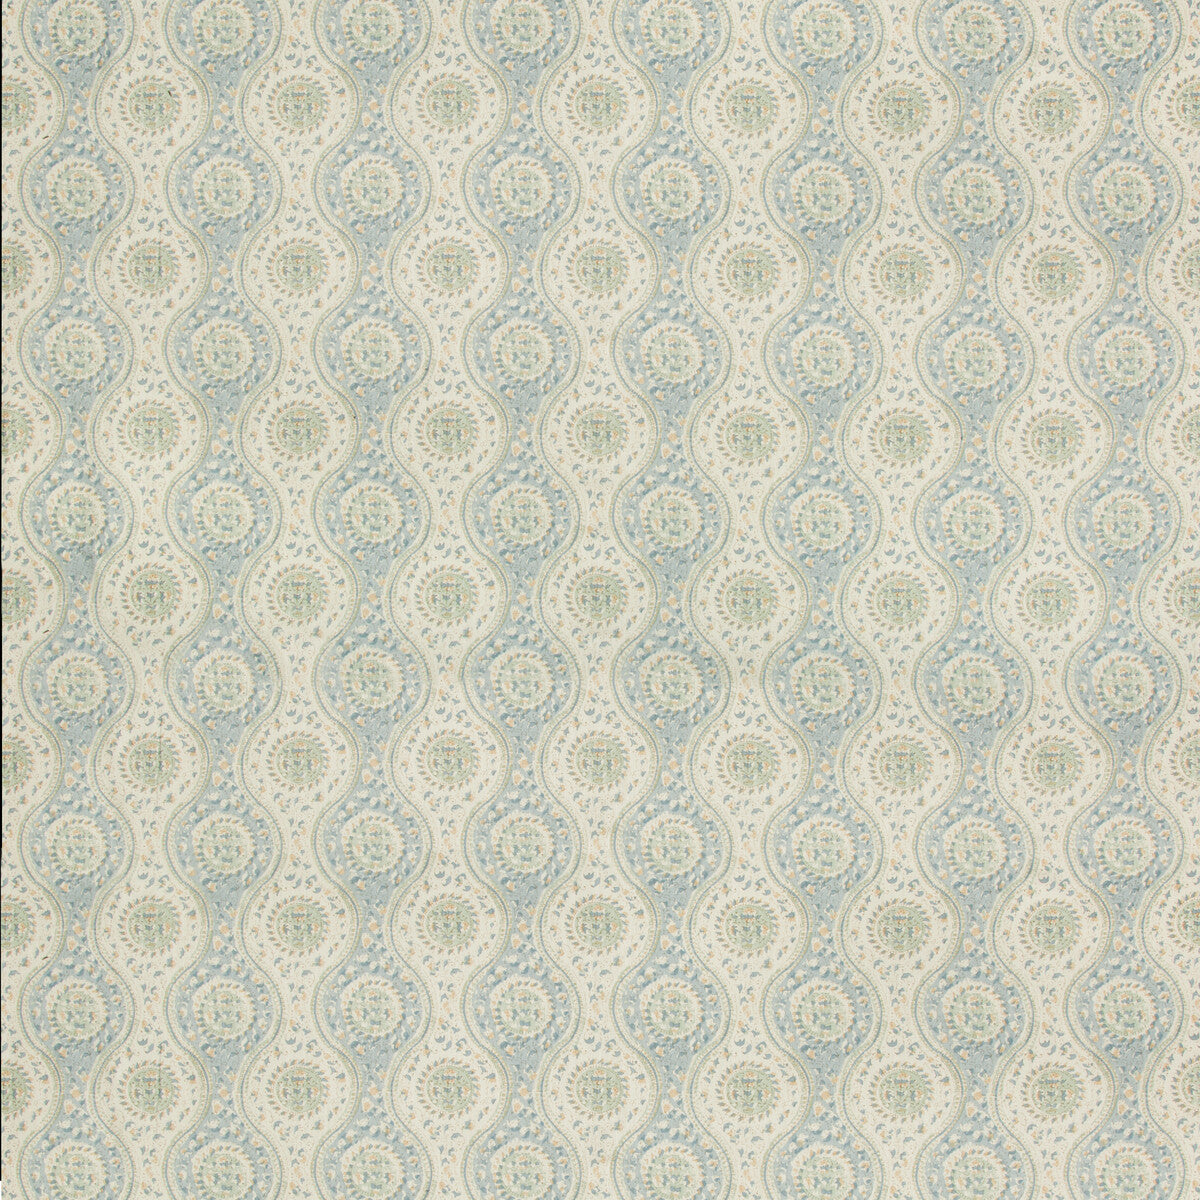 Nadari Print fabric in sky/aqua color - pattern 8019129.135.0 - by Brunschwig &amp; Fils in the Folio Francais collection